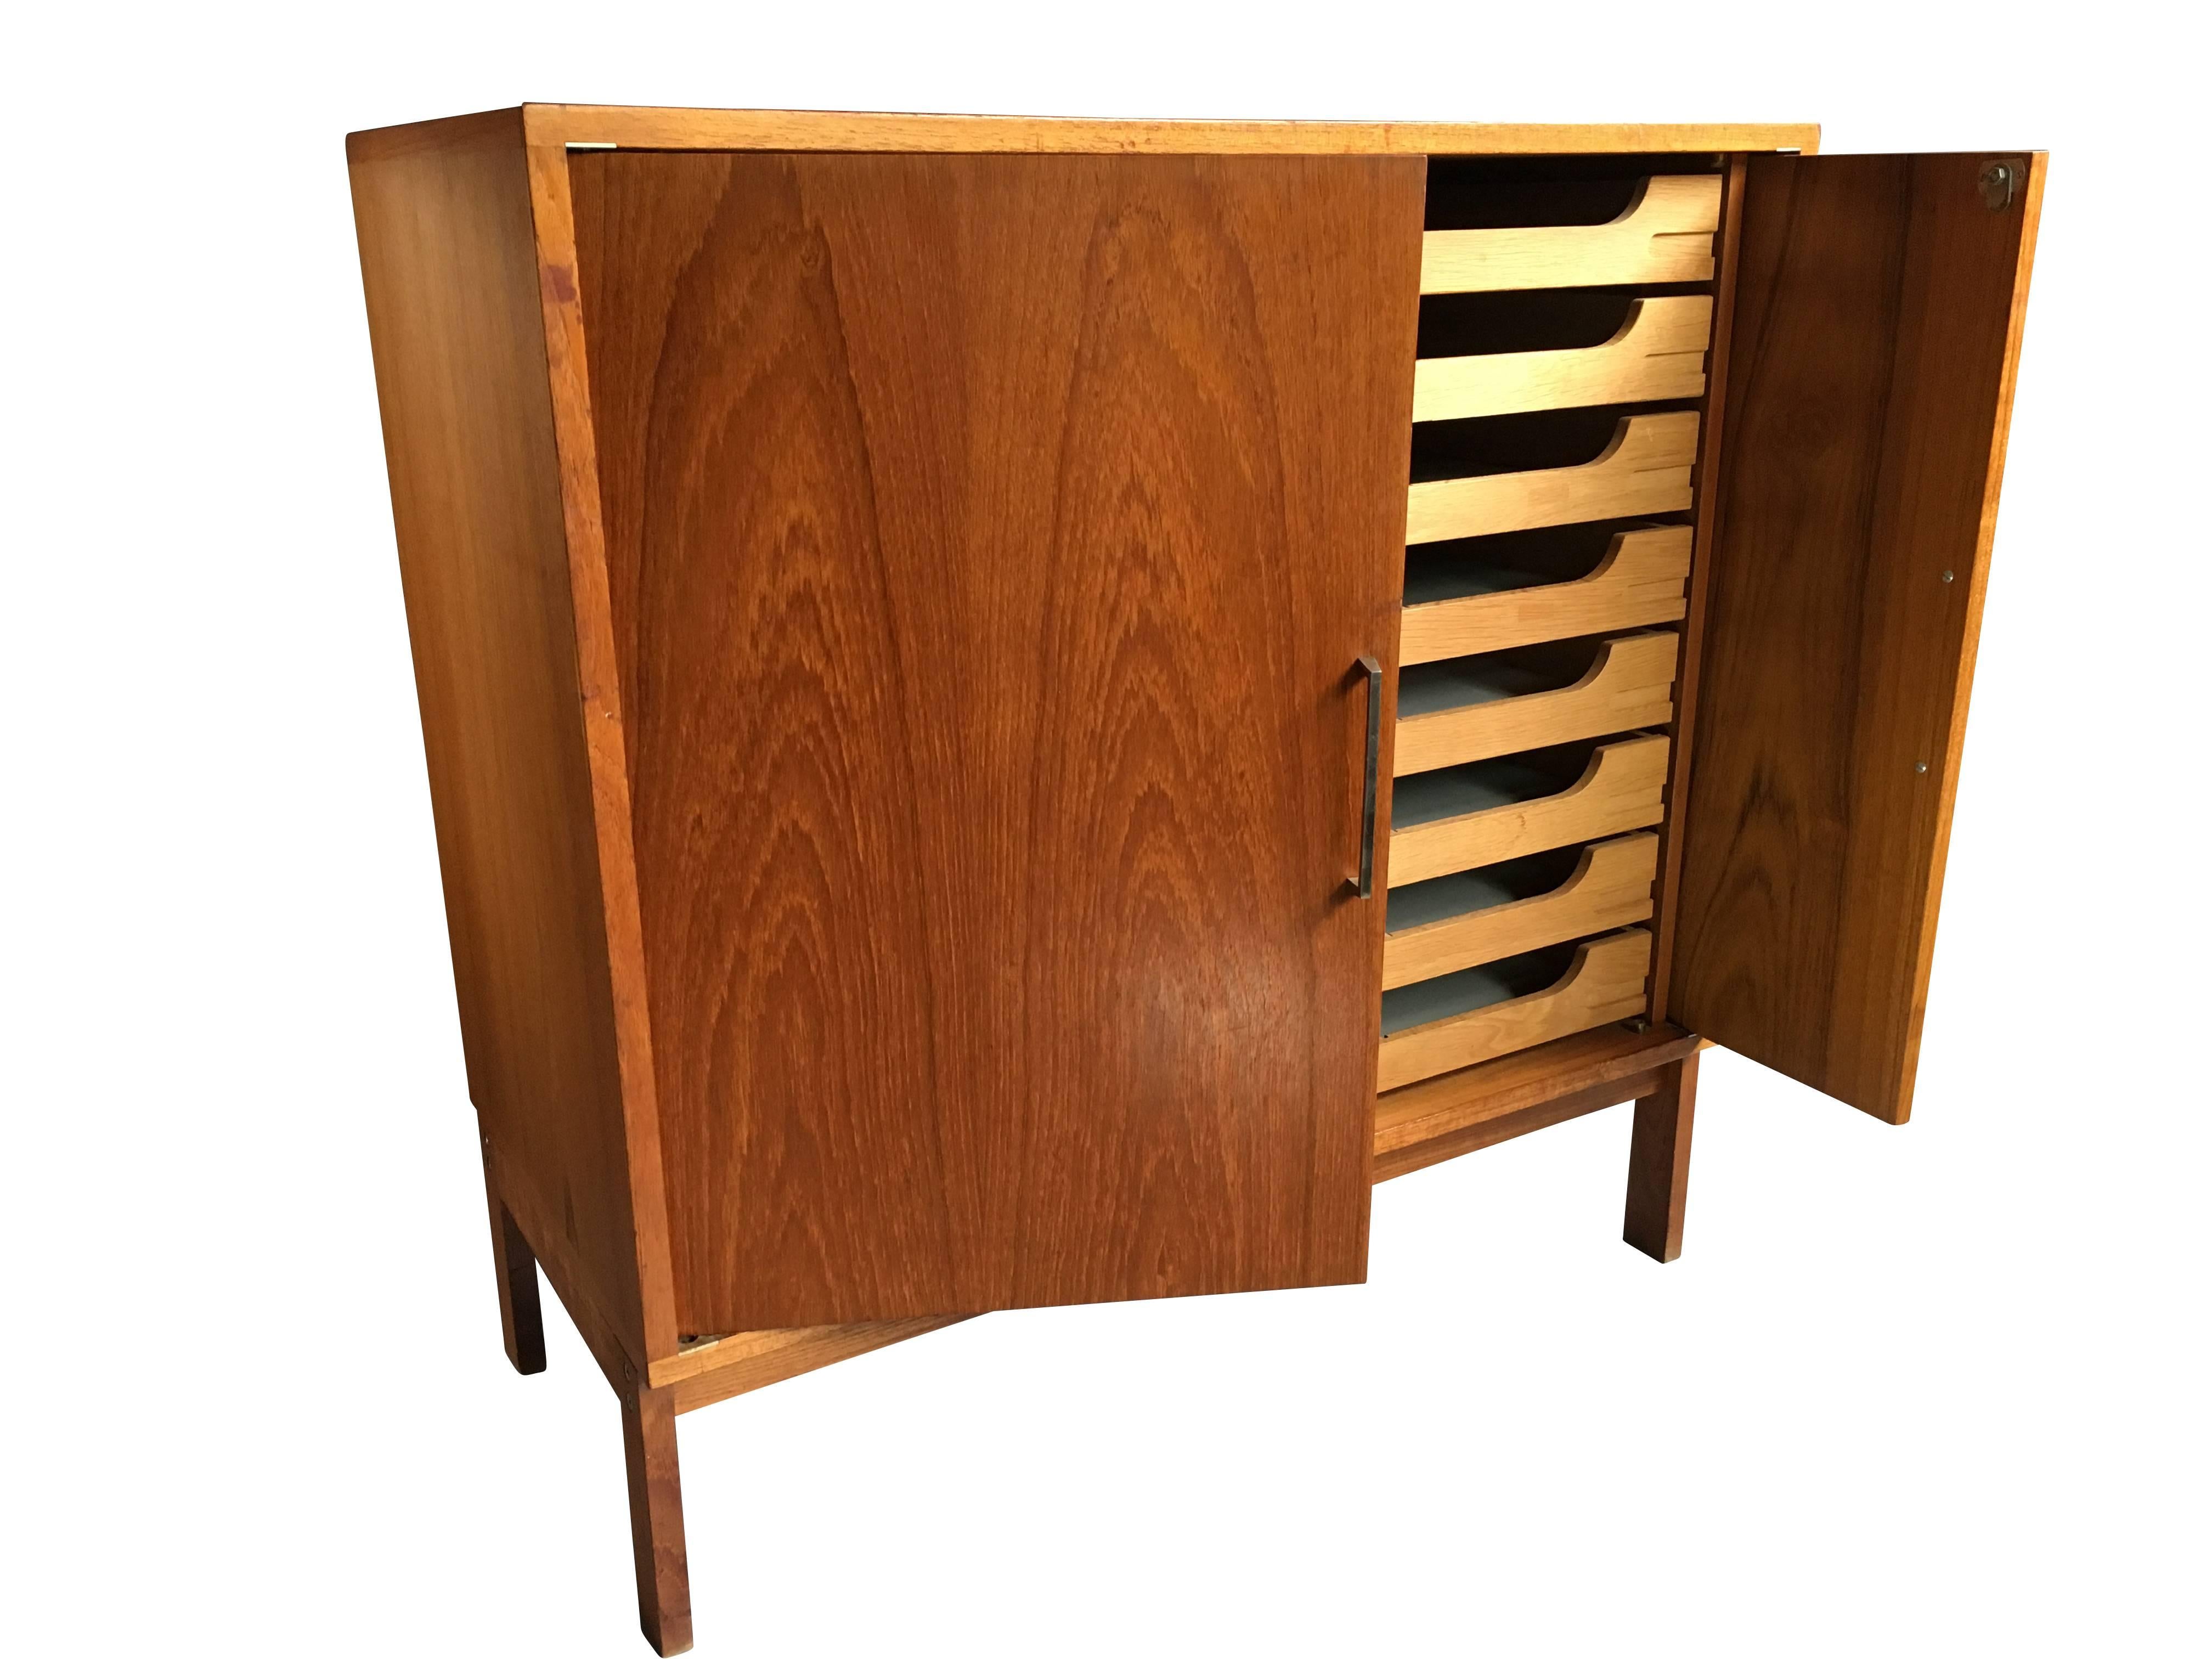 A Danish mid-century planchest/filing cabinet. Teak with oak drawers. Very clever slide fold-away doors.